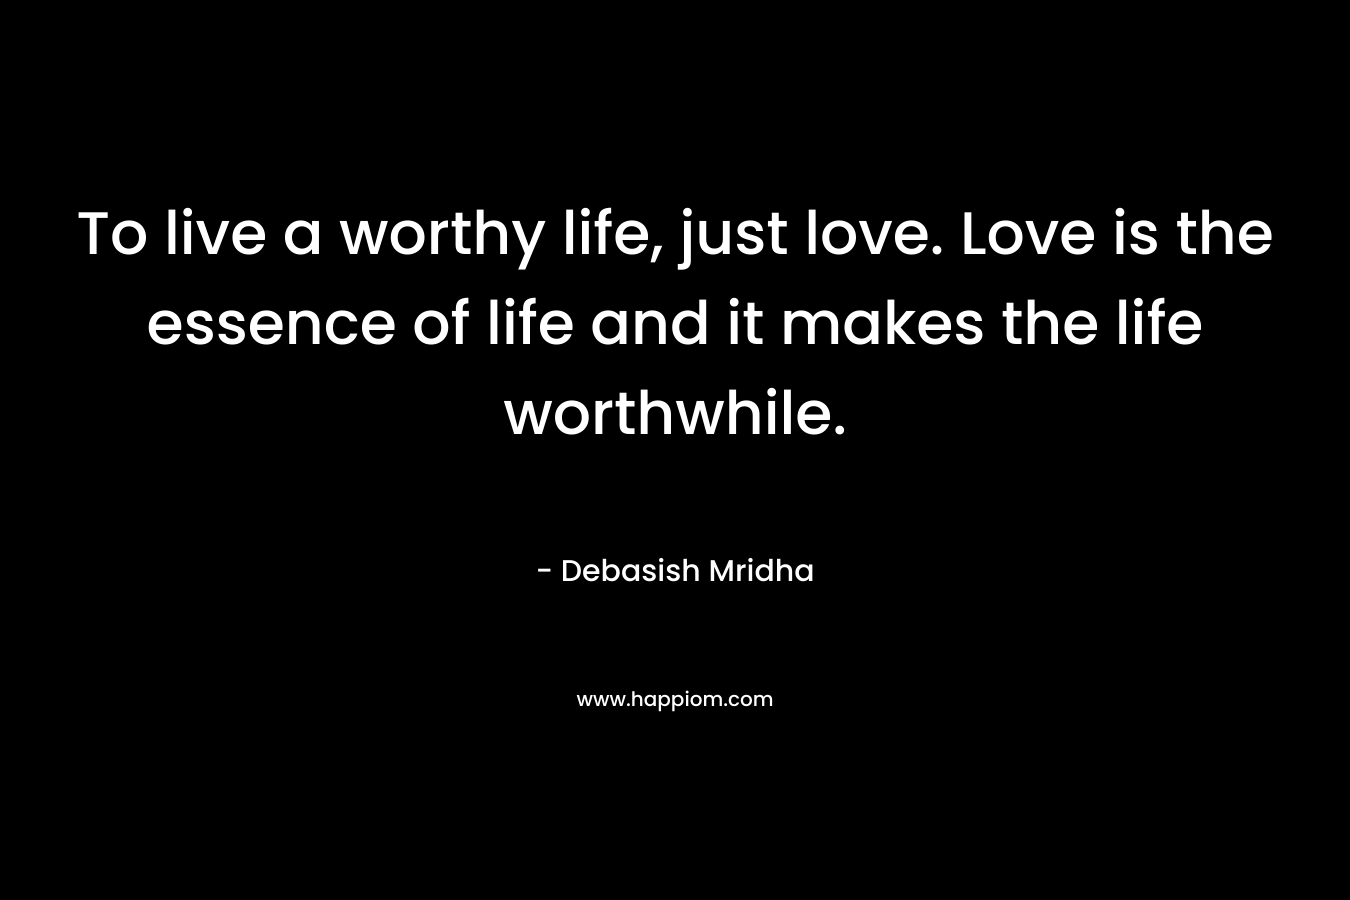 To live a worthy life, just love. Love is the essence of life and it makes the life worthwhile.